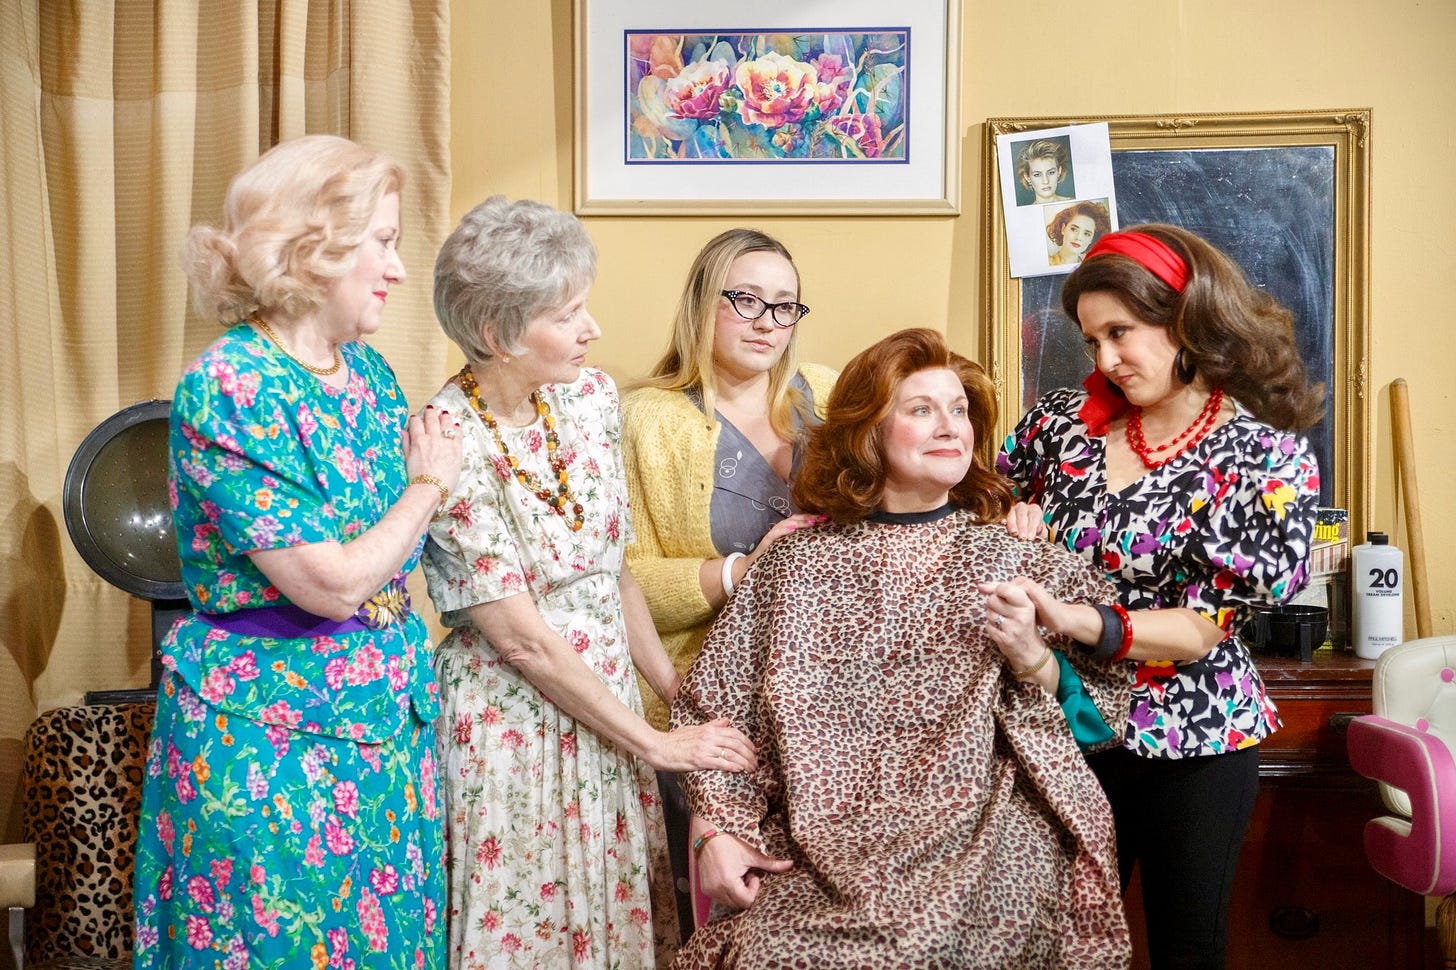 Four women in a beauty parlor